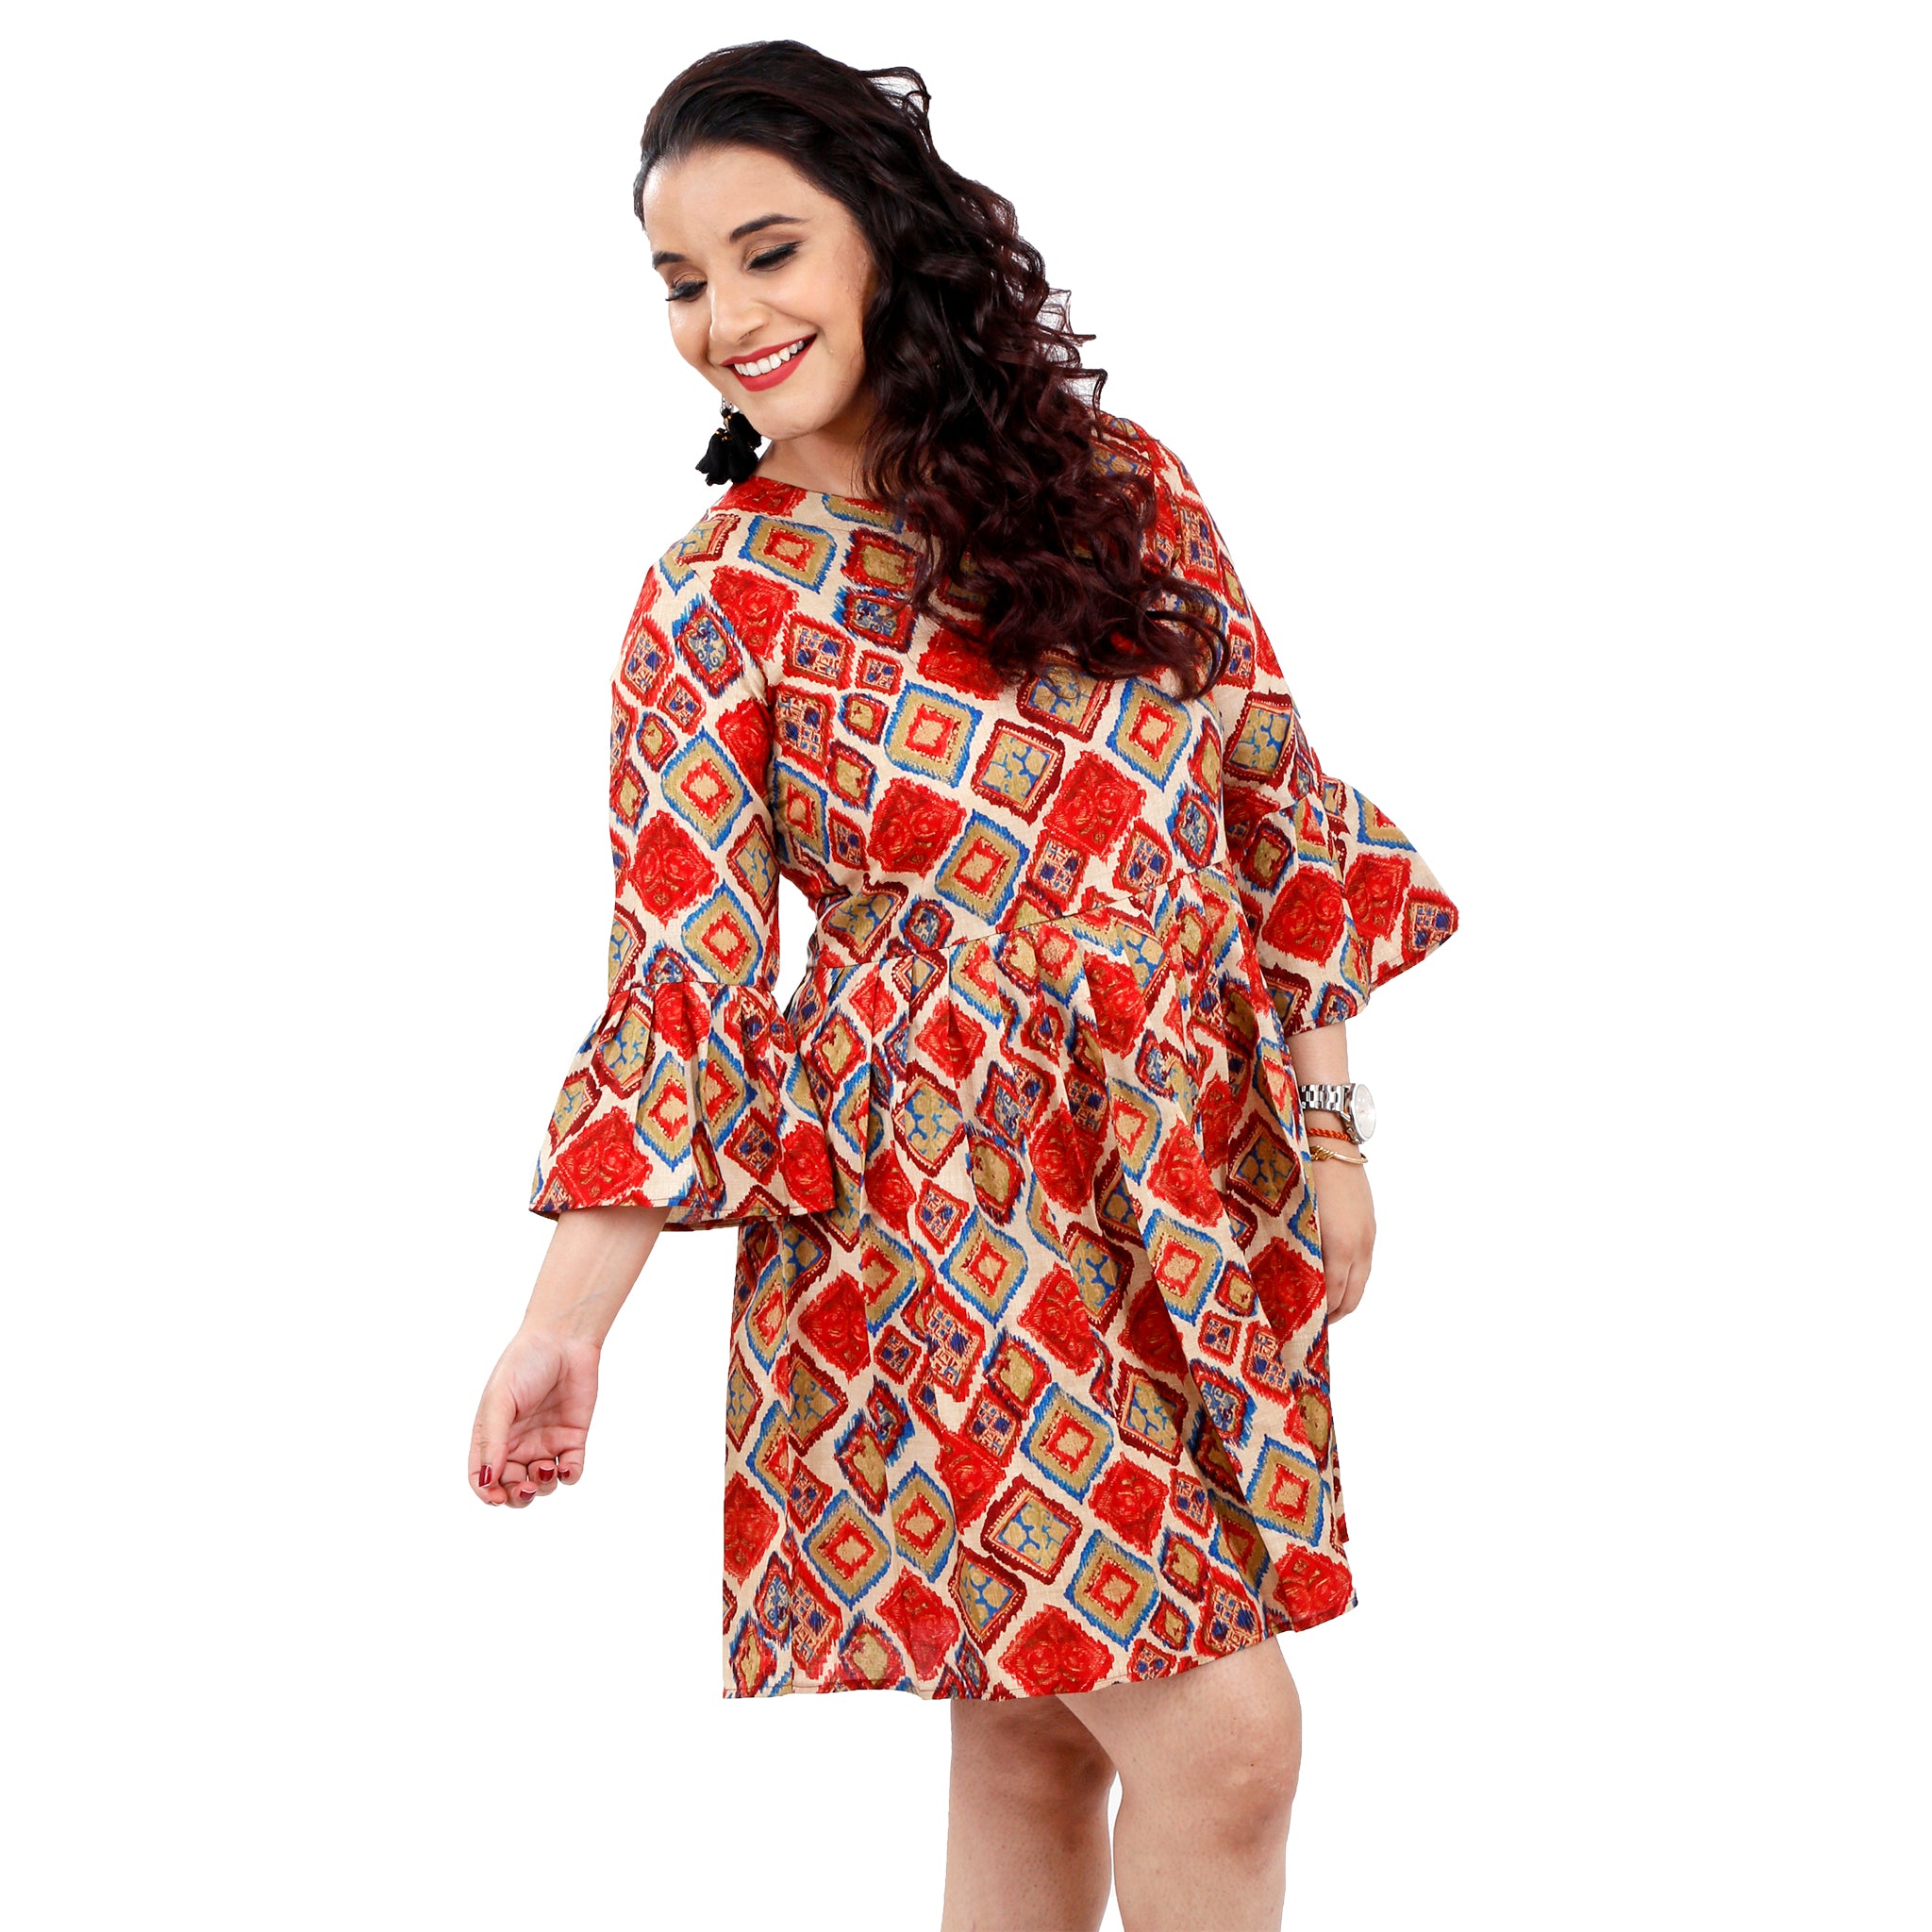 Luxe Tussar Silk Dress With Bell Sleeves